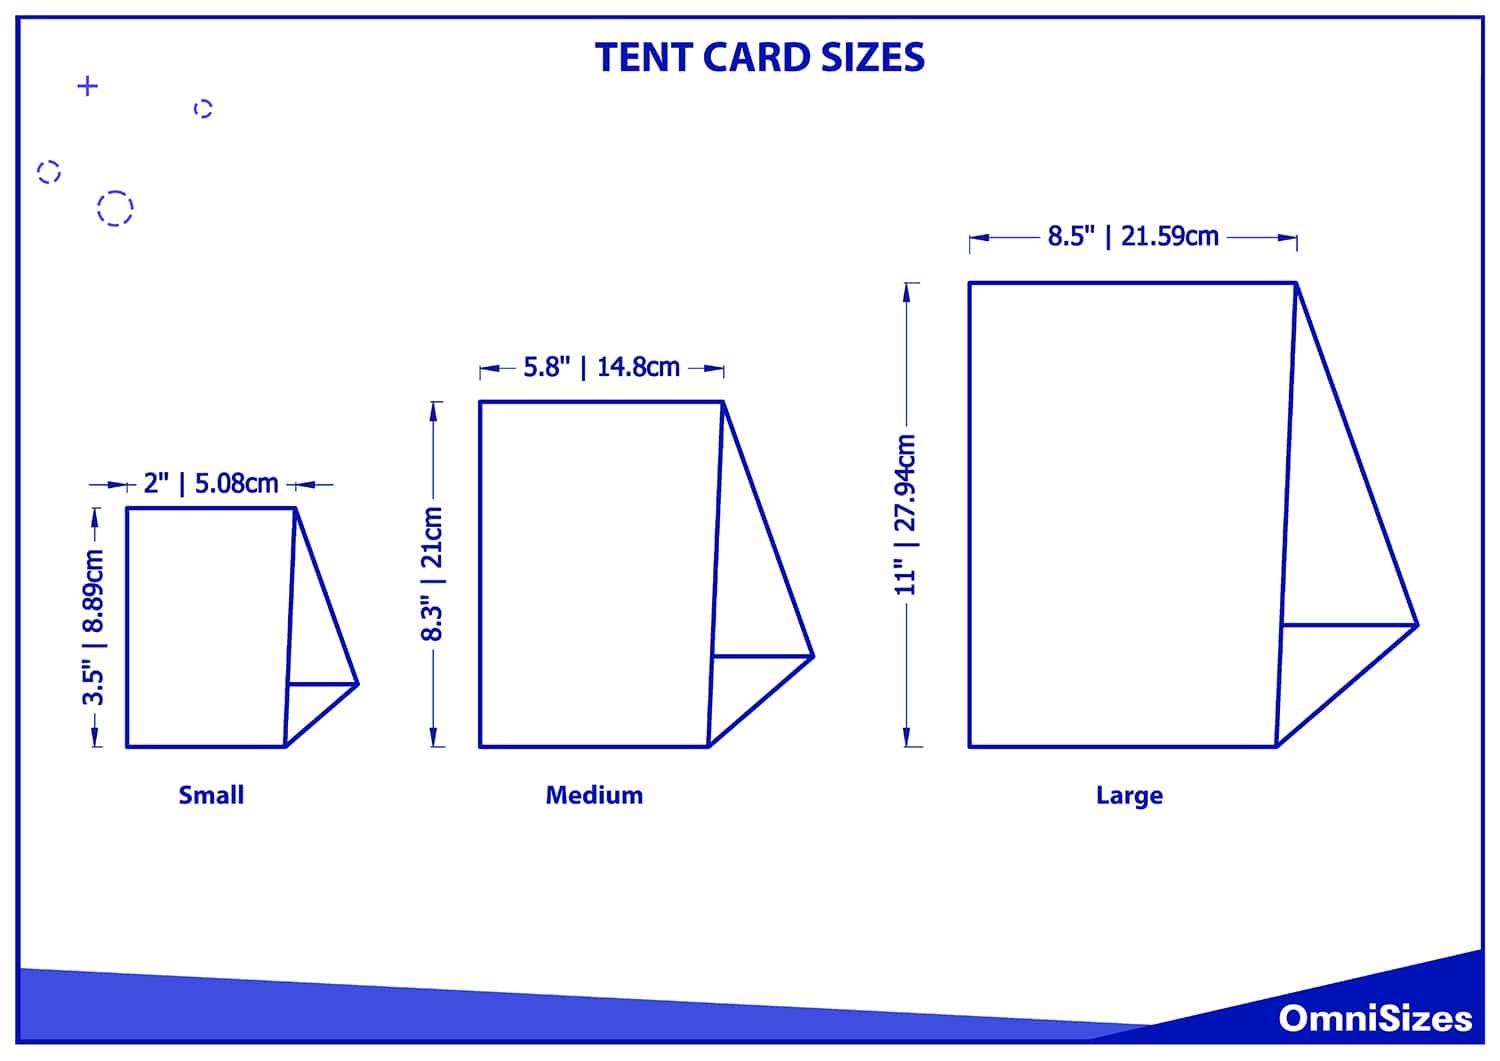 Tent card sizes